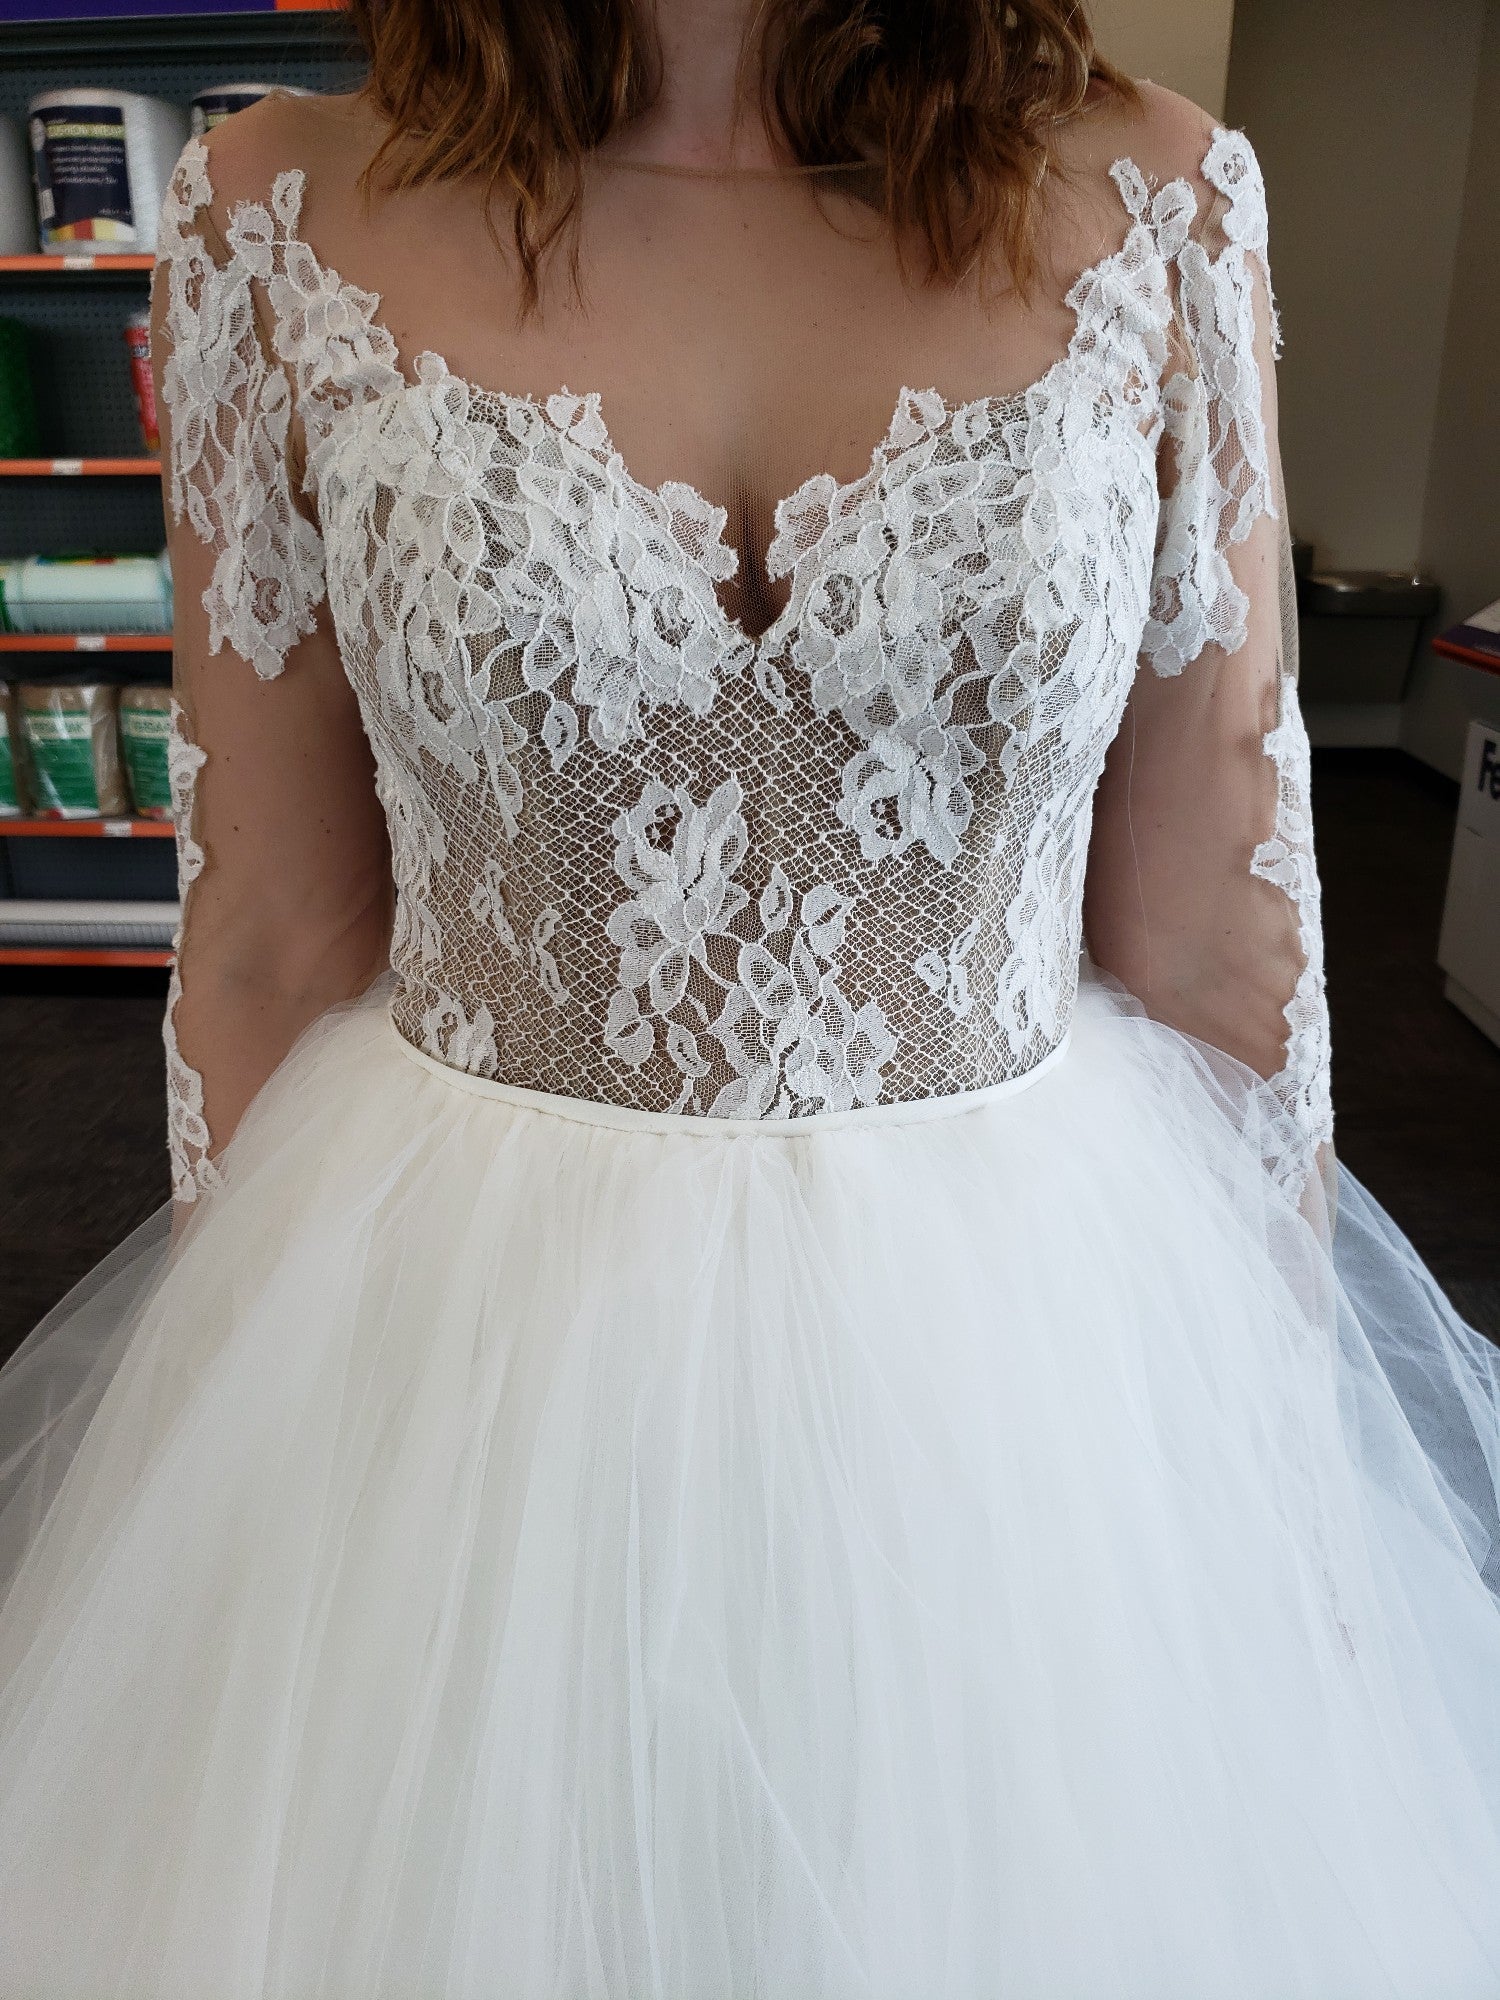 Hayley Paige - Pippa 1652 Sample Gown